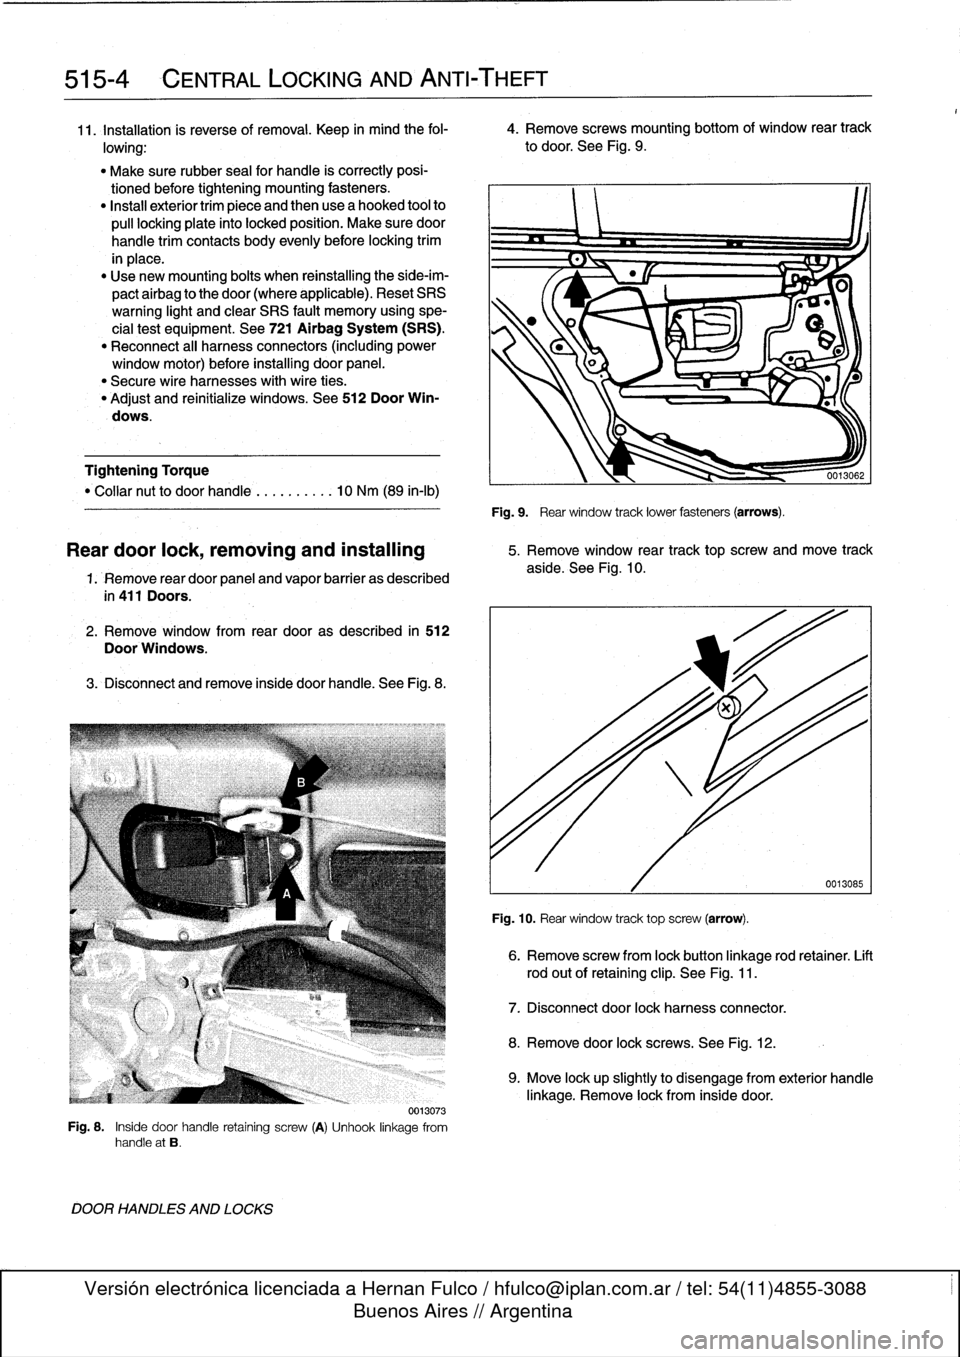 BMW 318i 1997 E36 Owners Manual 
515-4

	

CENTRAL
LOCKING
AND
ANTI-THEFT

11
.
Installation
is
reverse
of
removal
.
Keep
in
mind
the
fol-

	

4
.
Remove
screws
mounting
bottom
of
window
rear
track

lowing
:

	

to
door
.
See
Fig
.
